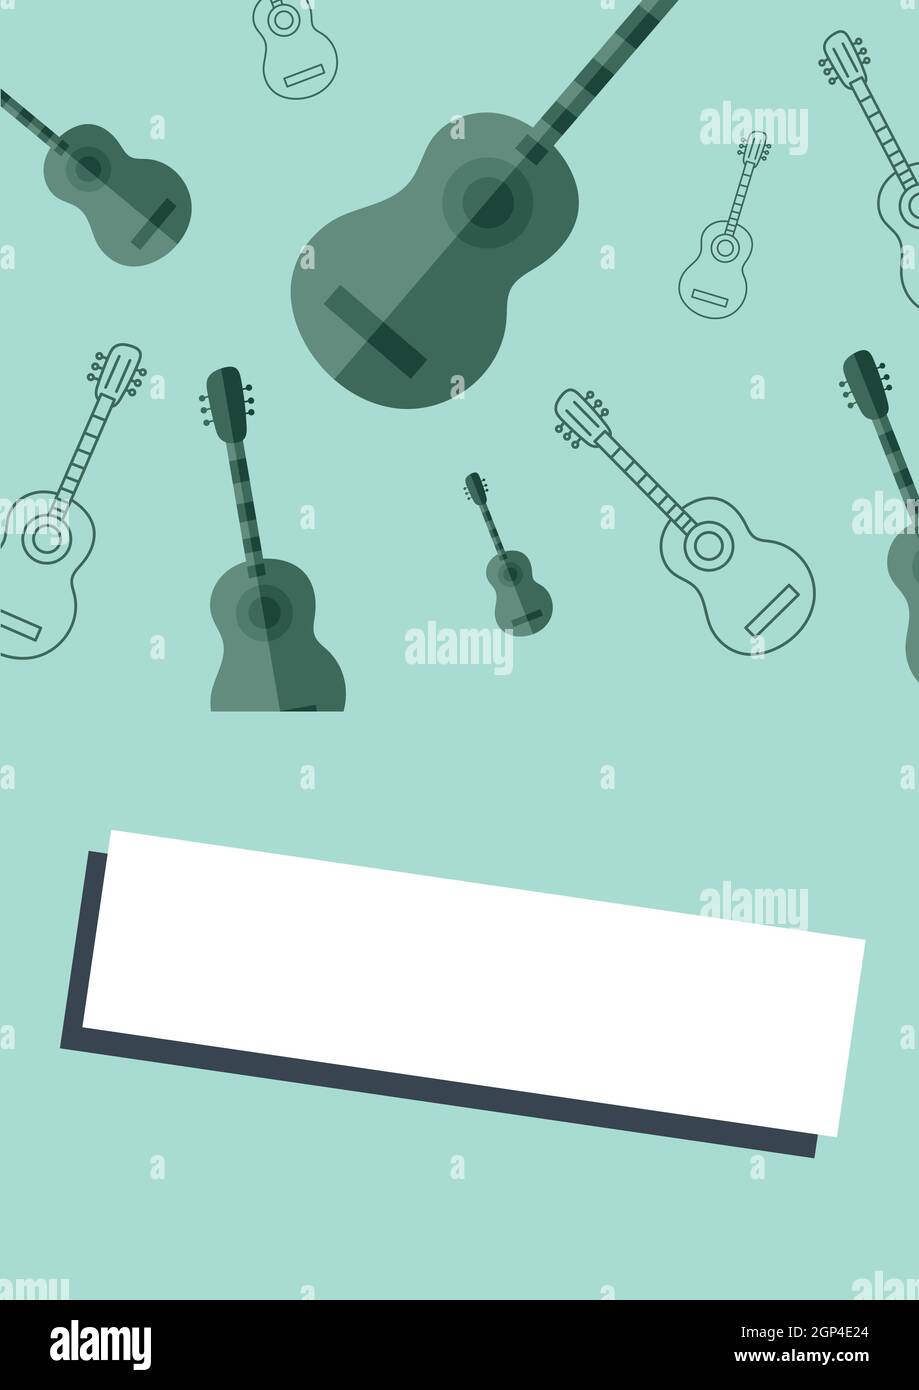 Composition of multiple guitars icons on green background Stock Photo